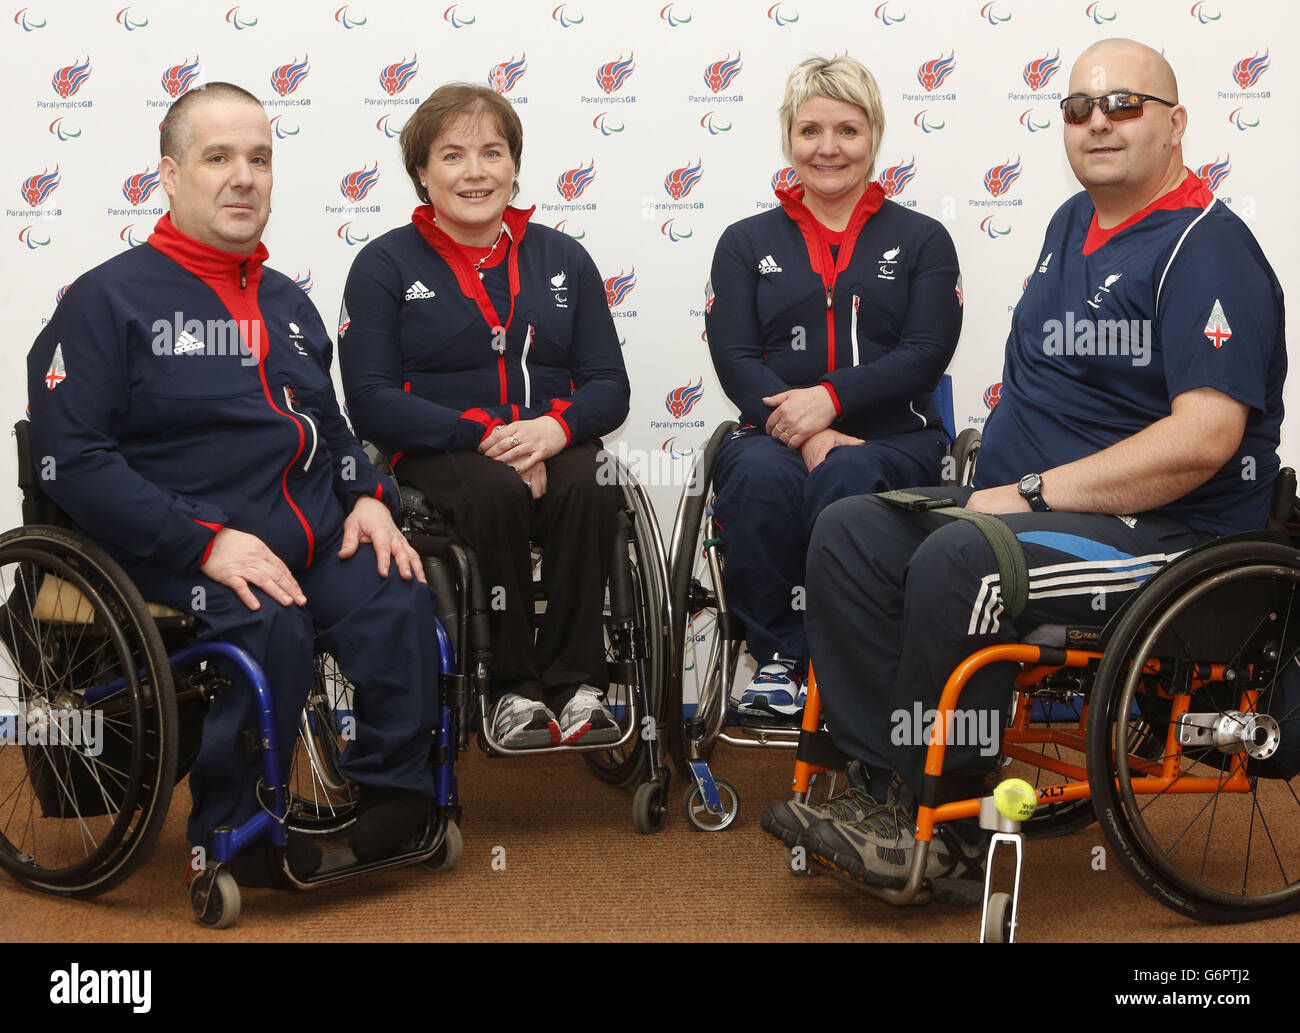 Wheelchair Curling's (left to right) Robert McPherson, Aileen Neilson, Angela Malone and Gregor Ewan during the Paralympic Team GB Launch for Sochi at the Radisson Blu Hotel, Glasgow. Stock Photo